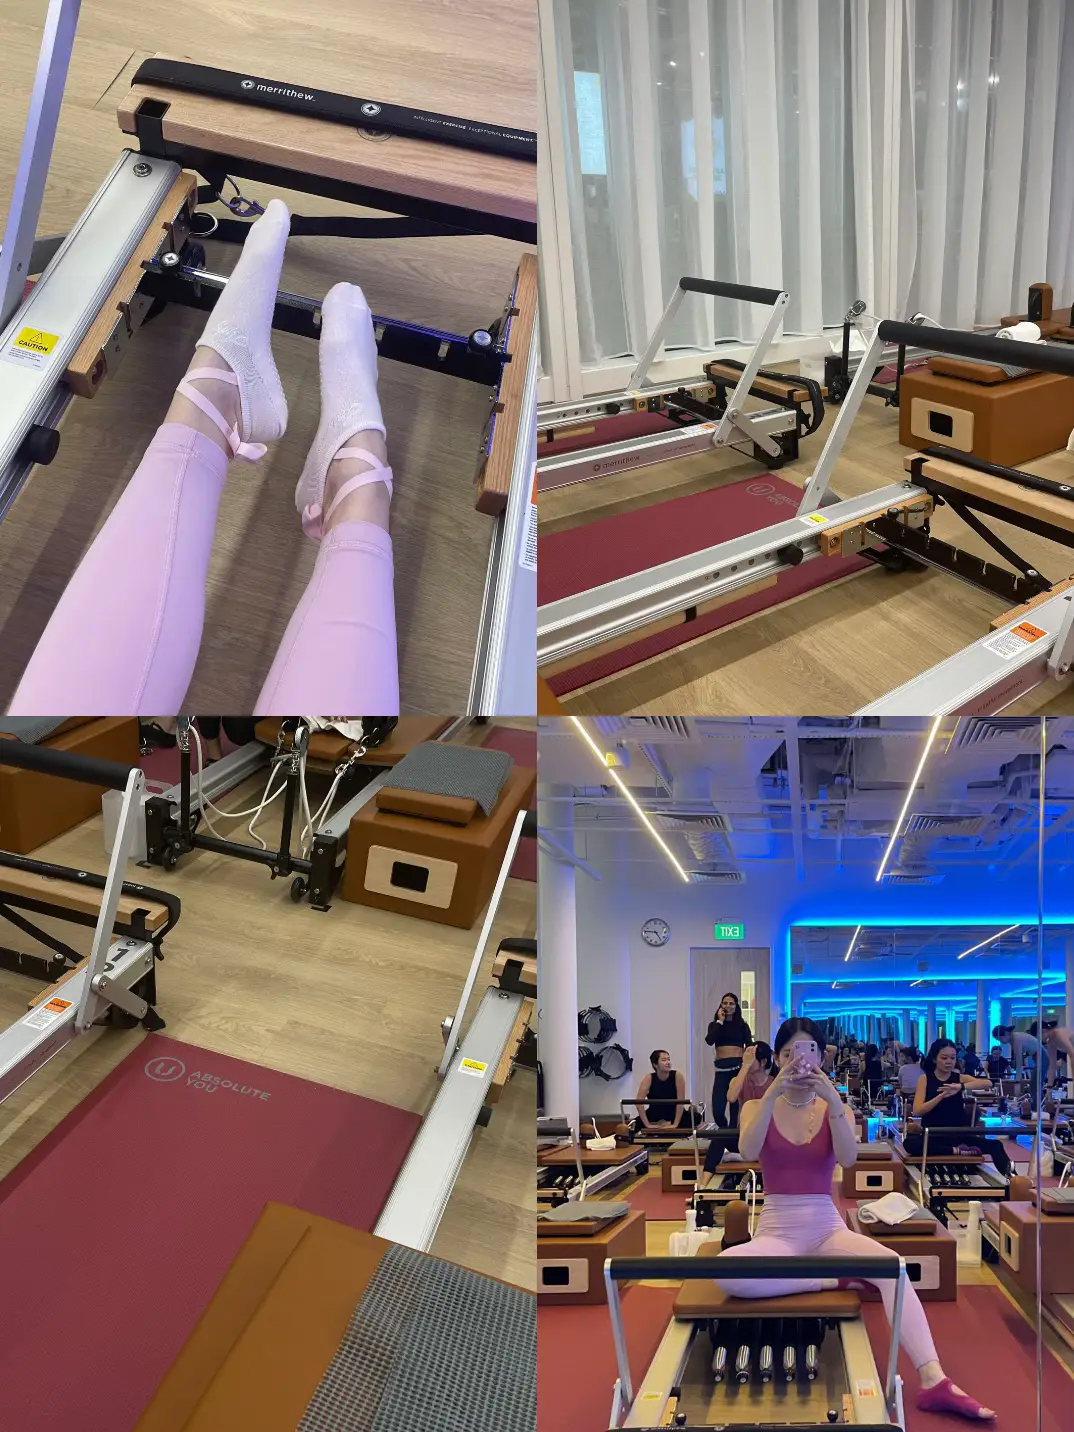 Gratz Pilates Half Cadillac Conversion  ✨ Studio Tour ✨ Instead of just  showing in photos what Pilates apparatus I have to offer you in your  private sessions, I thought I'd show